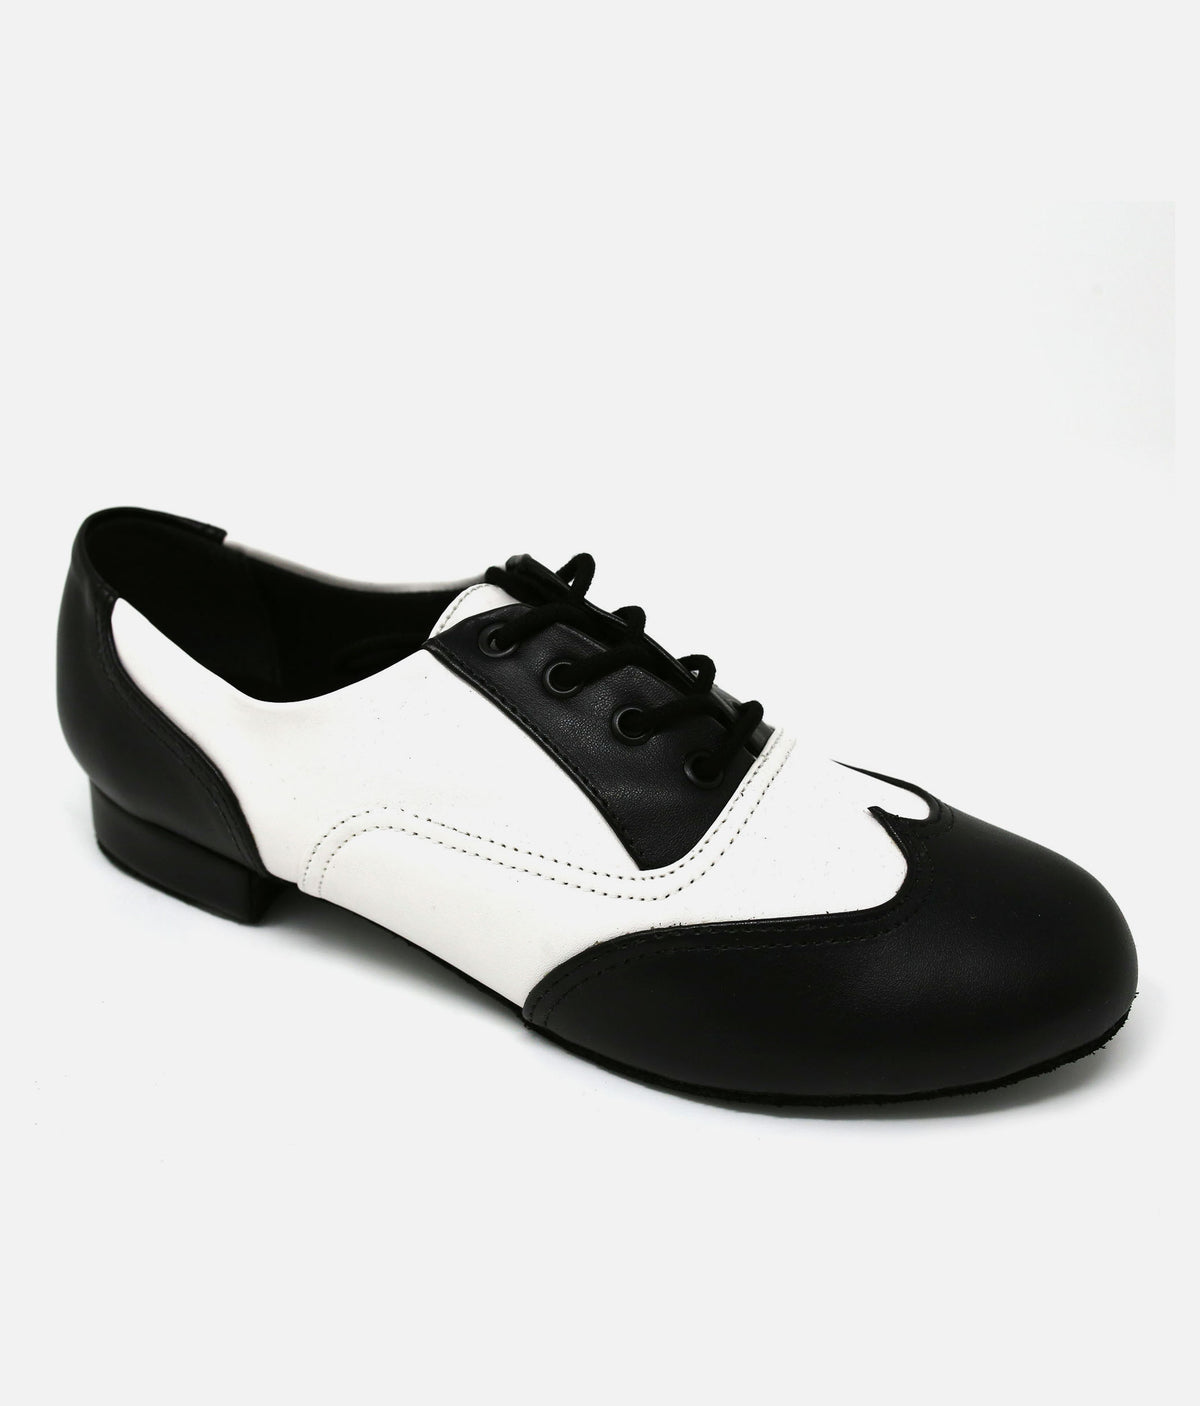 Oxford Style Practice Shoes - JZ 97